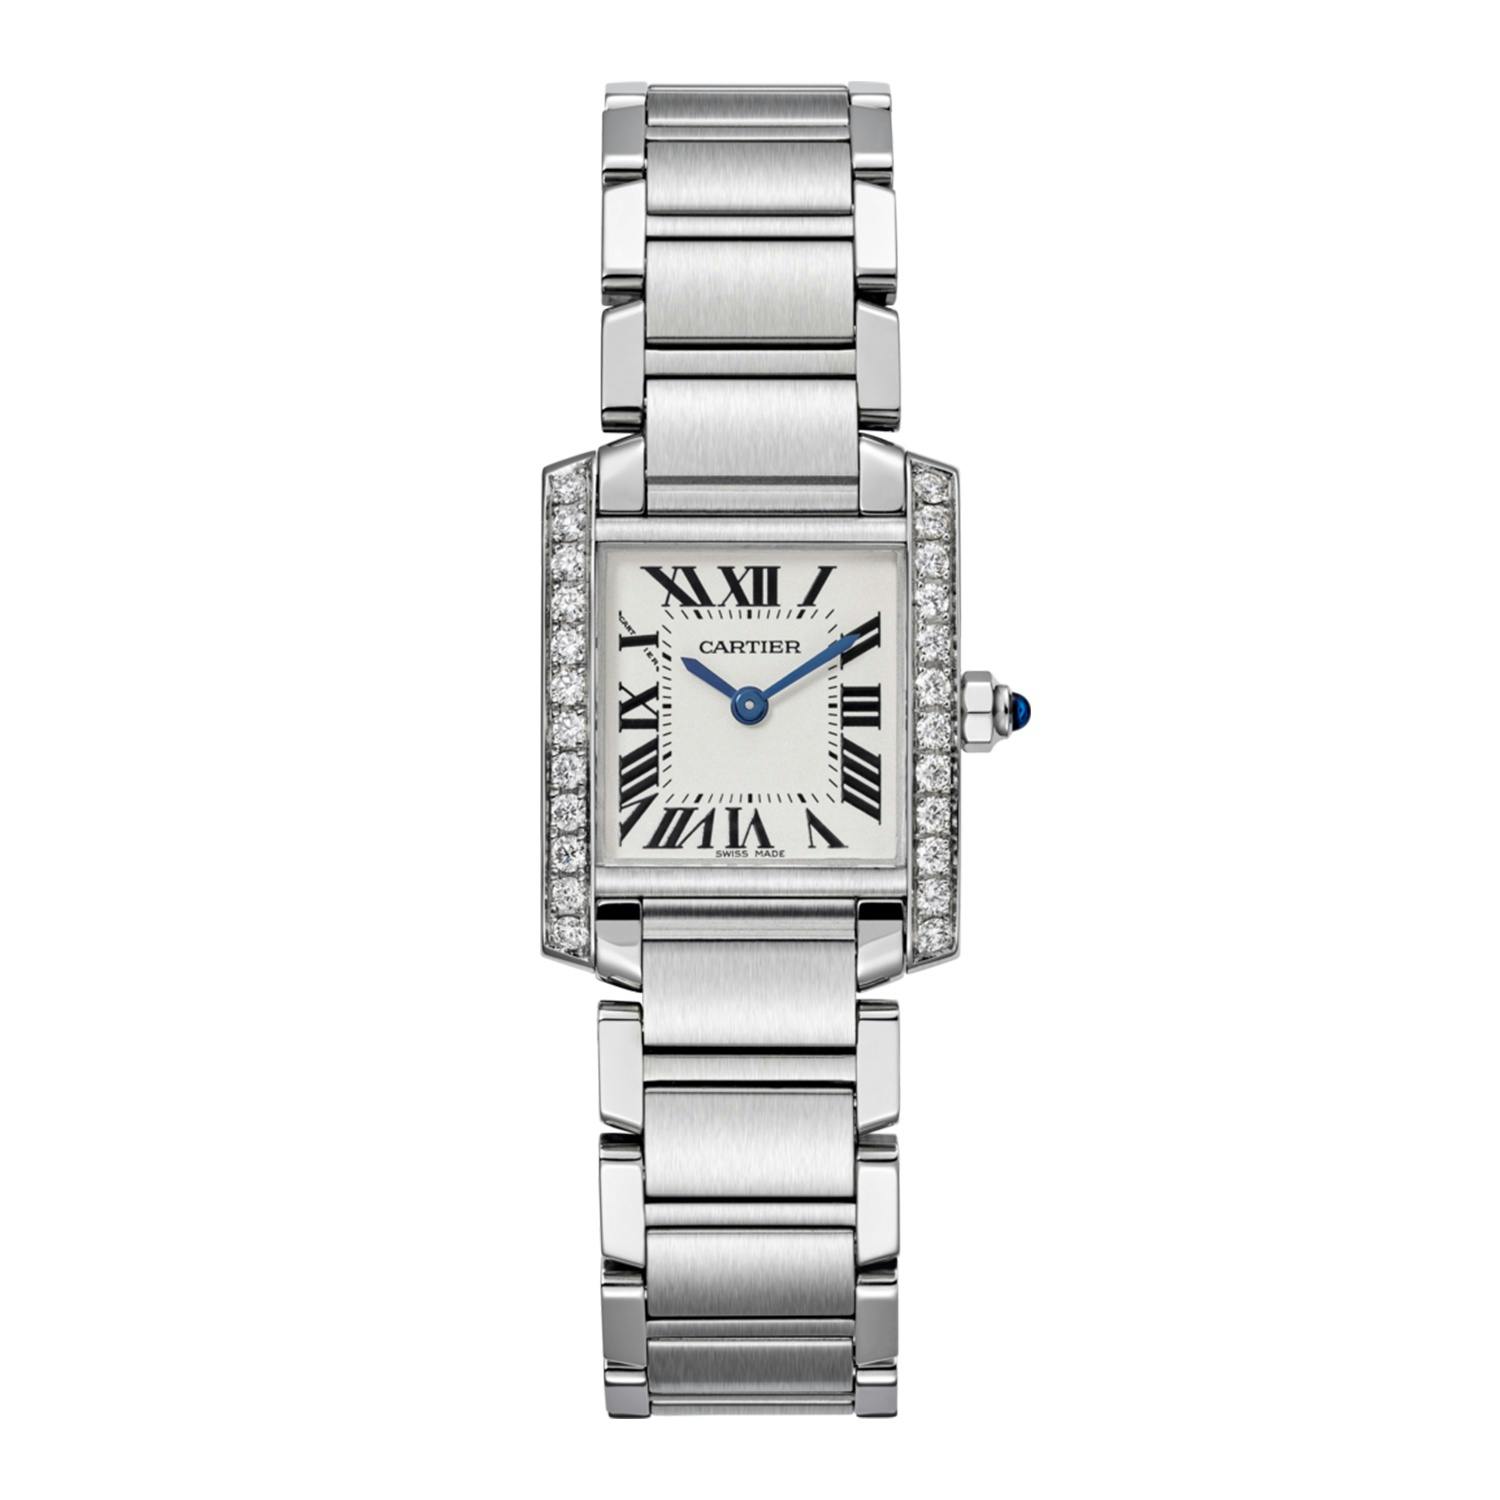 Cartier Tank Francaise Watch with Diamonds, small model